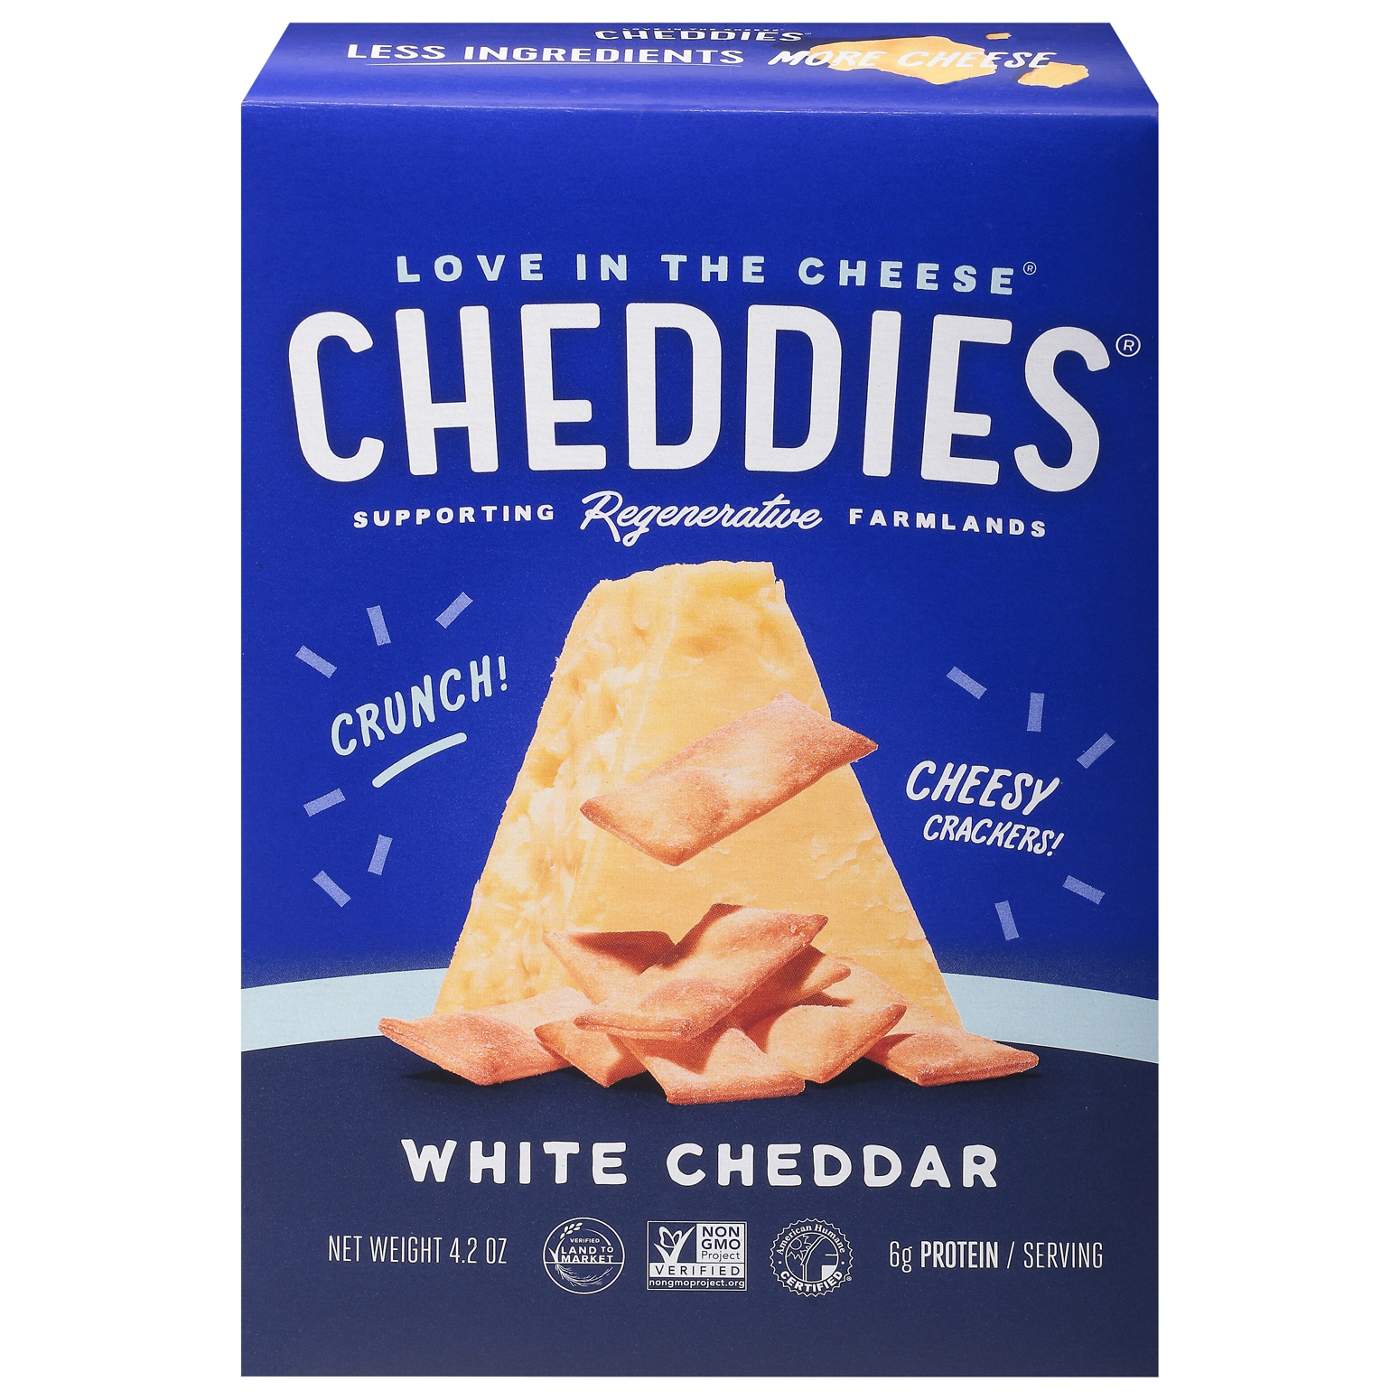 Cheddies Cheese Crackers - White Cheddar; image 1 of 2